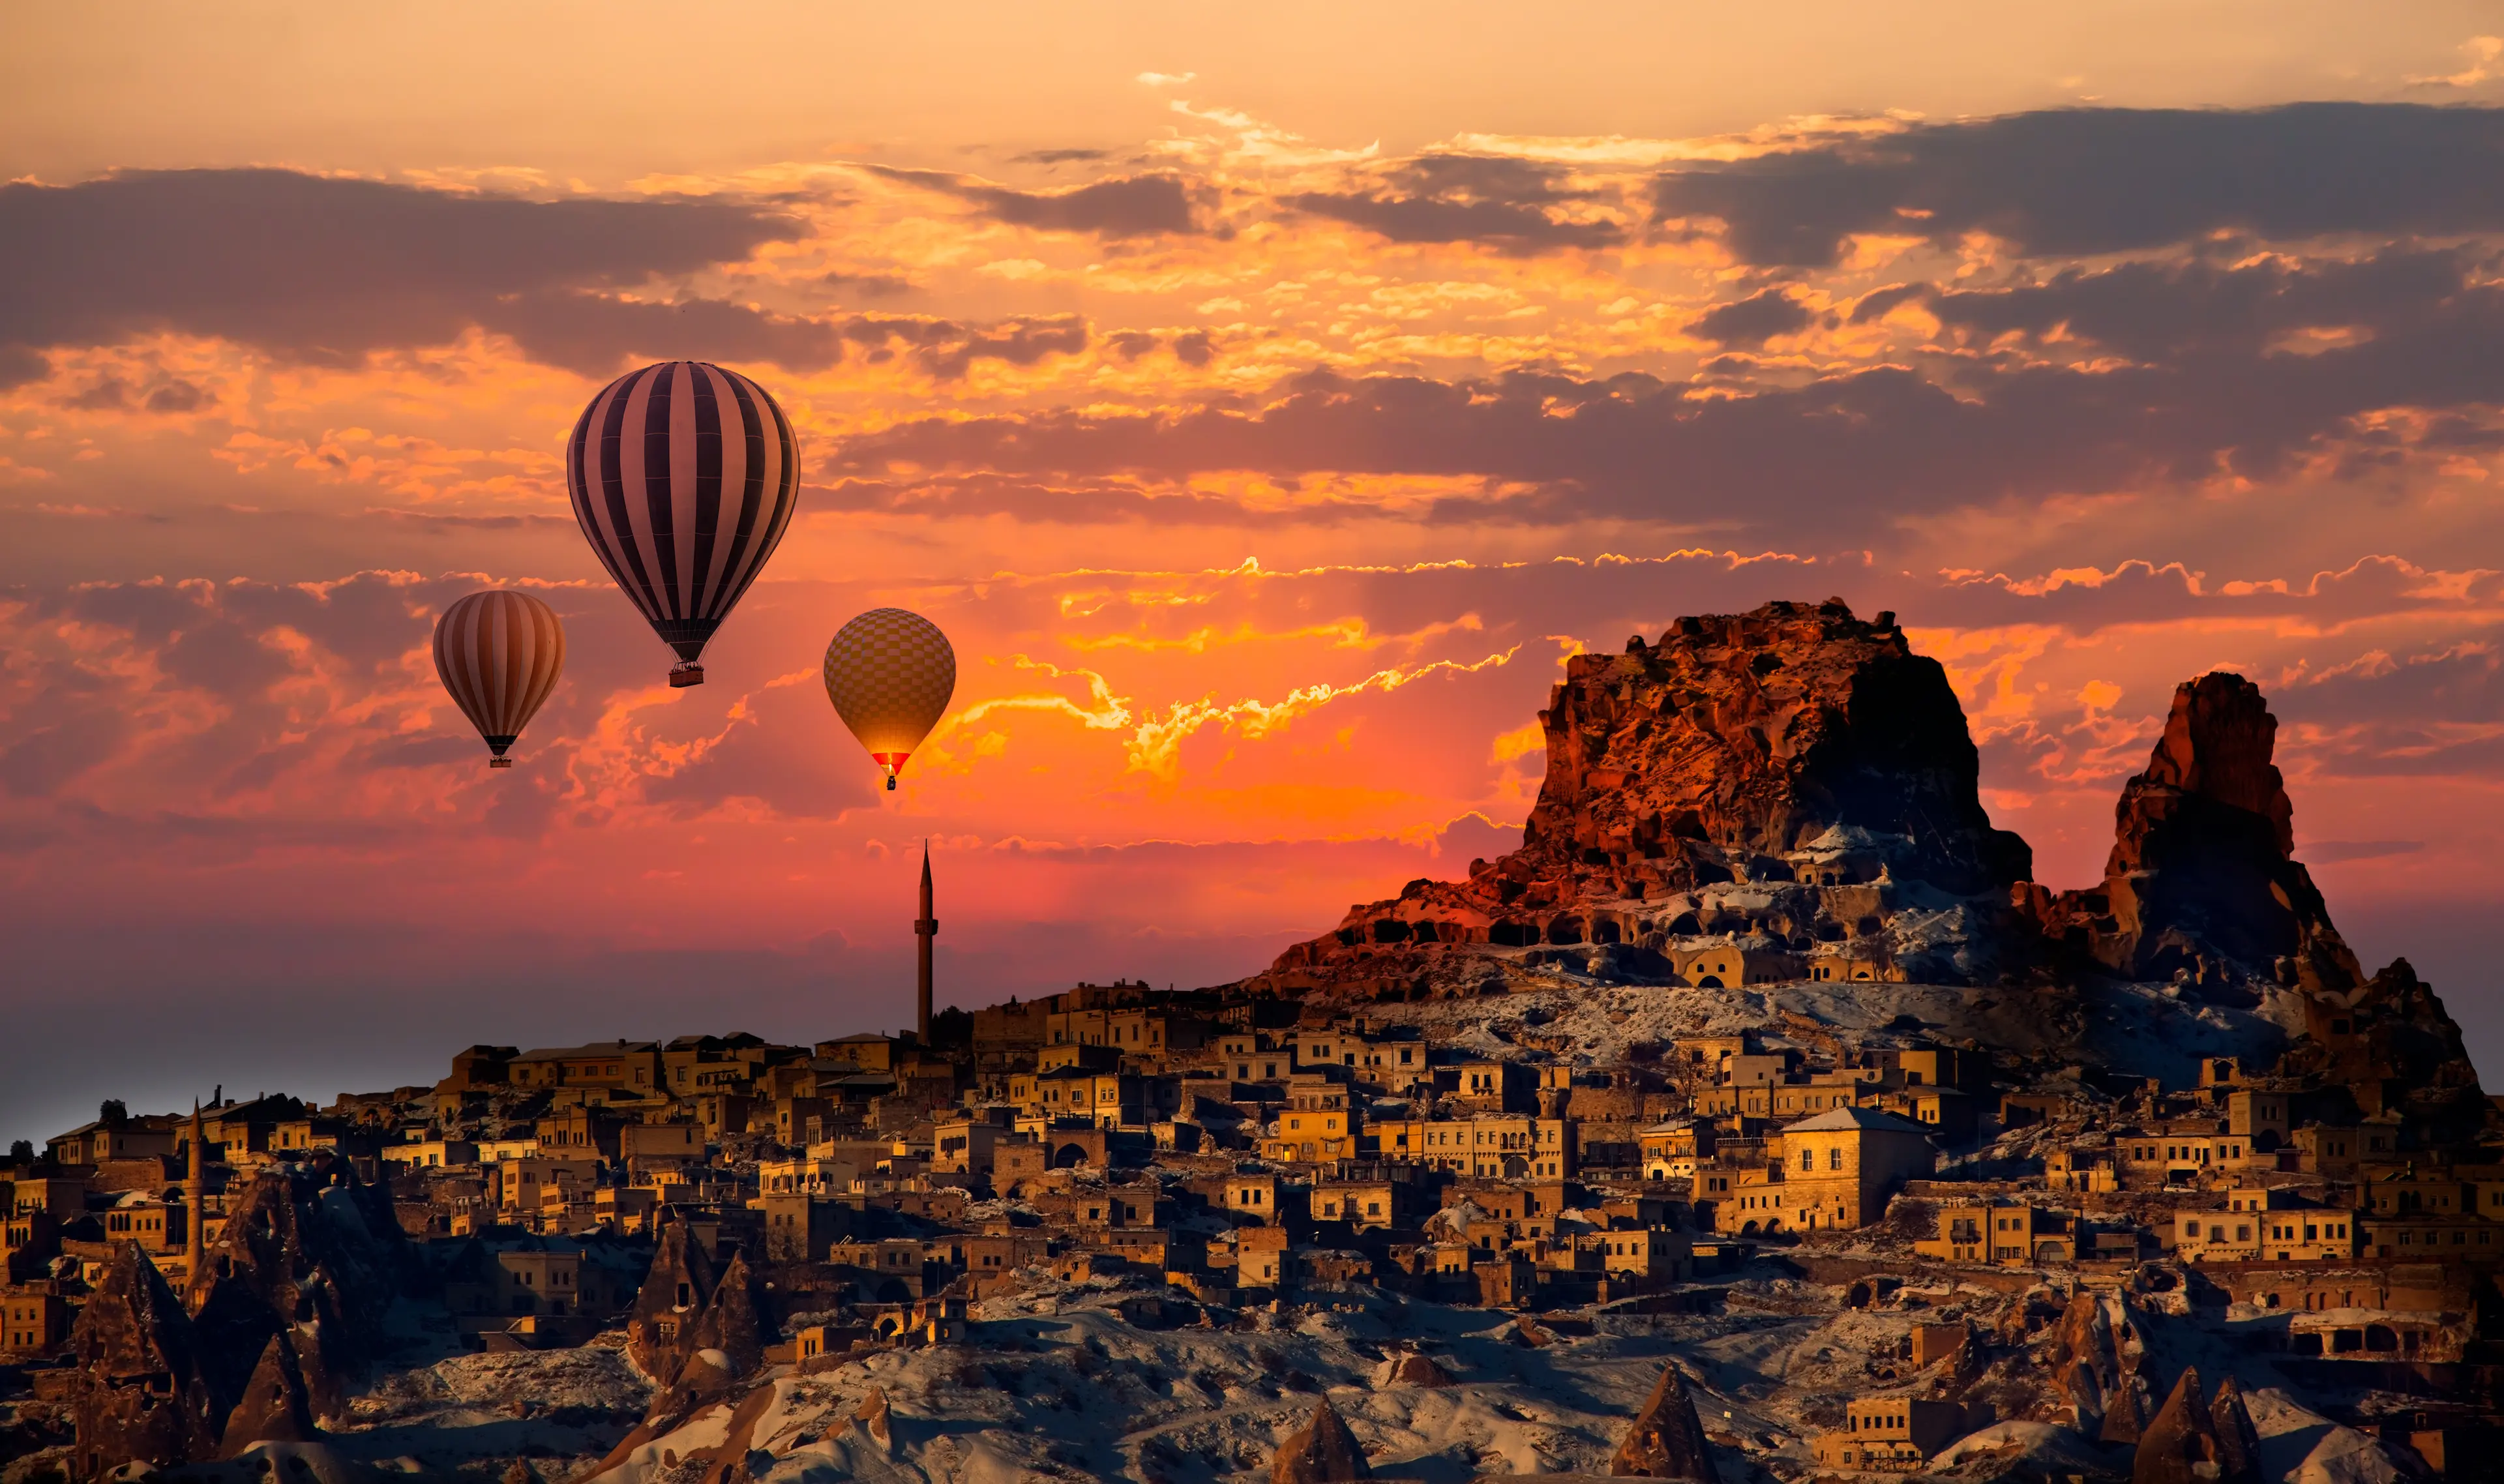 3-Day Local Adventure with Your Partner: Cappadocia Outdoors and Cuisine